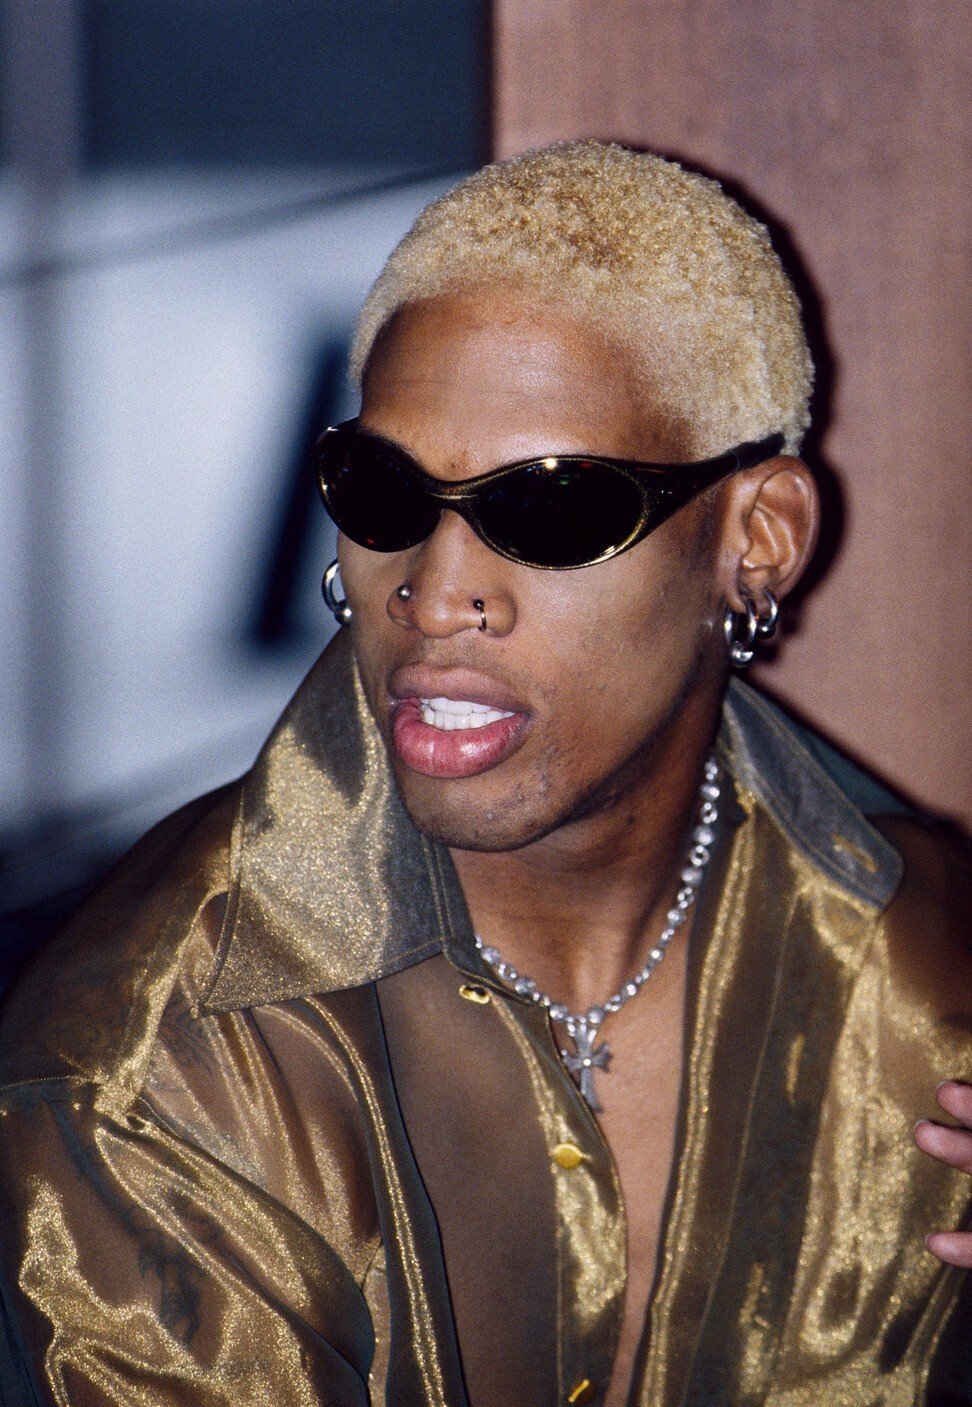 Rodman in gold at the 1996 MTV Video Music Awards. Photo: Getty Images